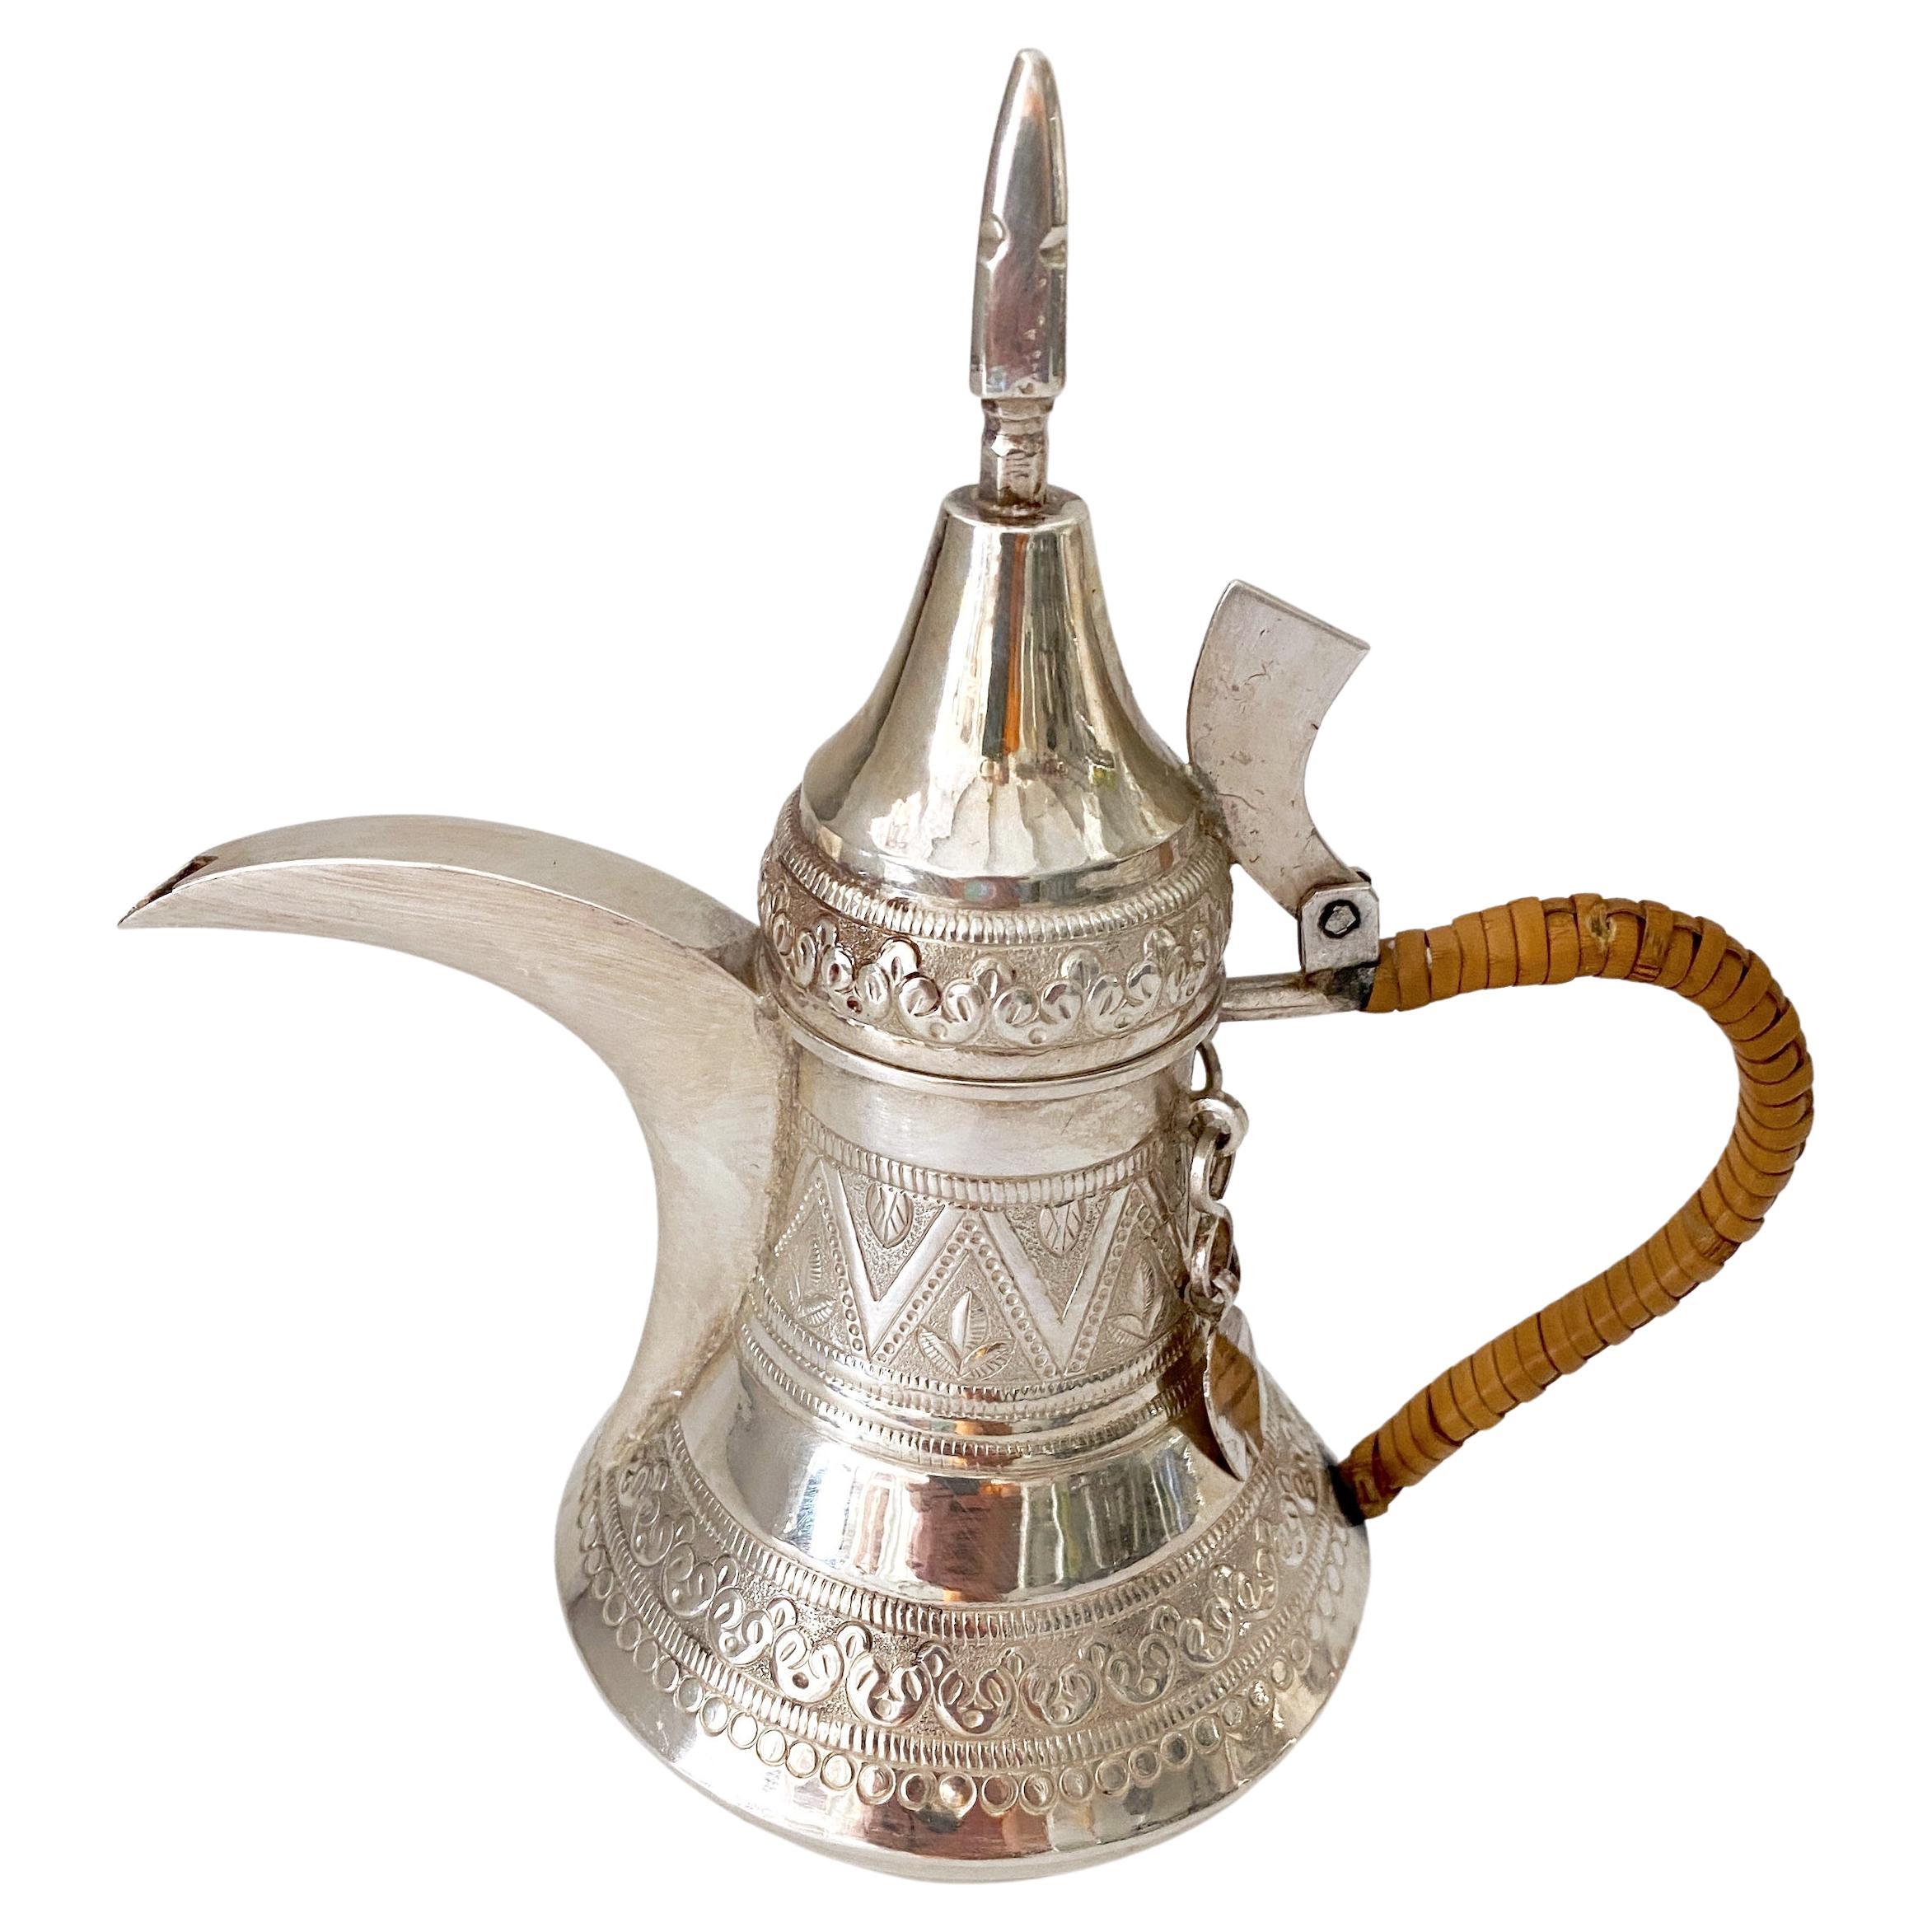 Vintage Arabic /Middle Eastern Silverplated Dallah Coffee Pot